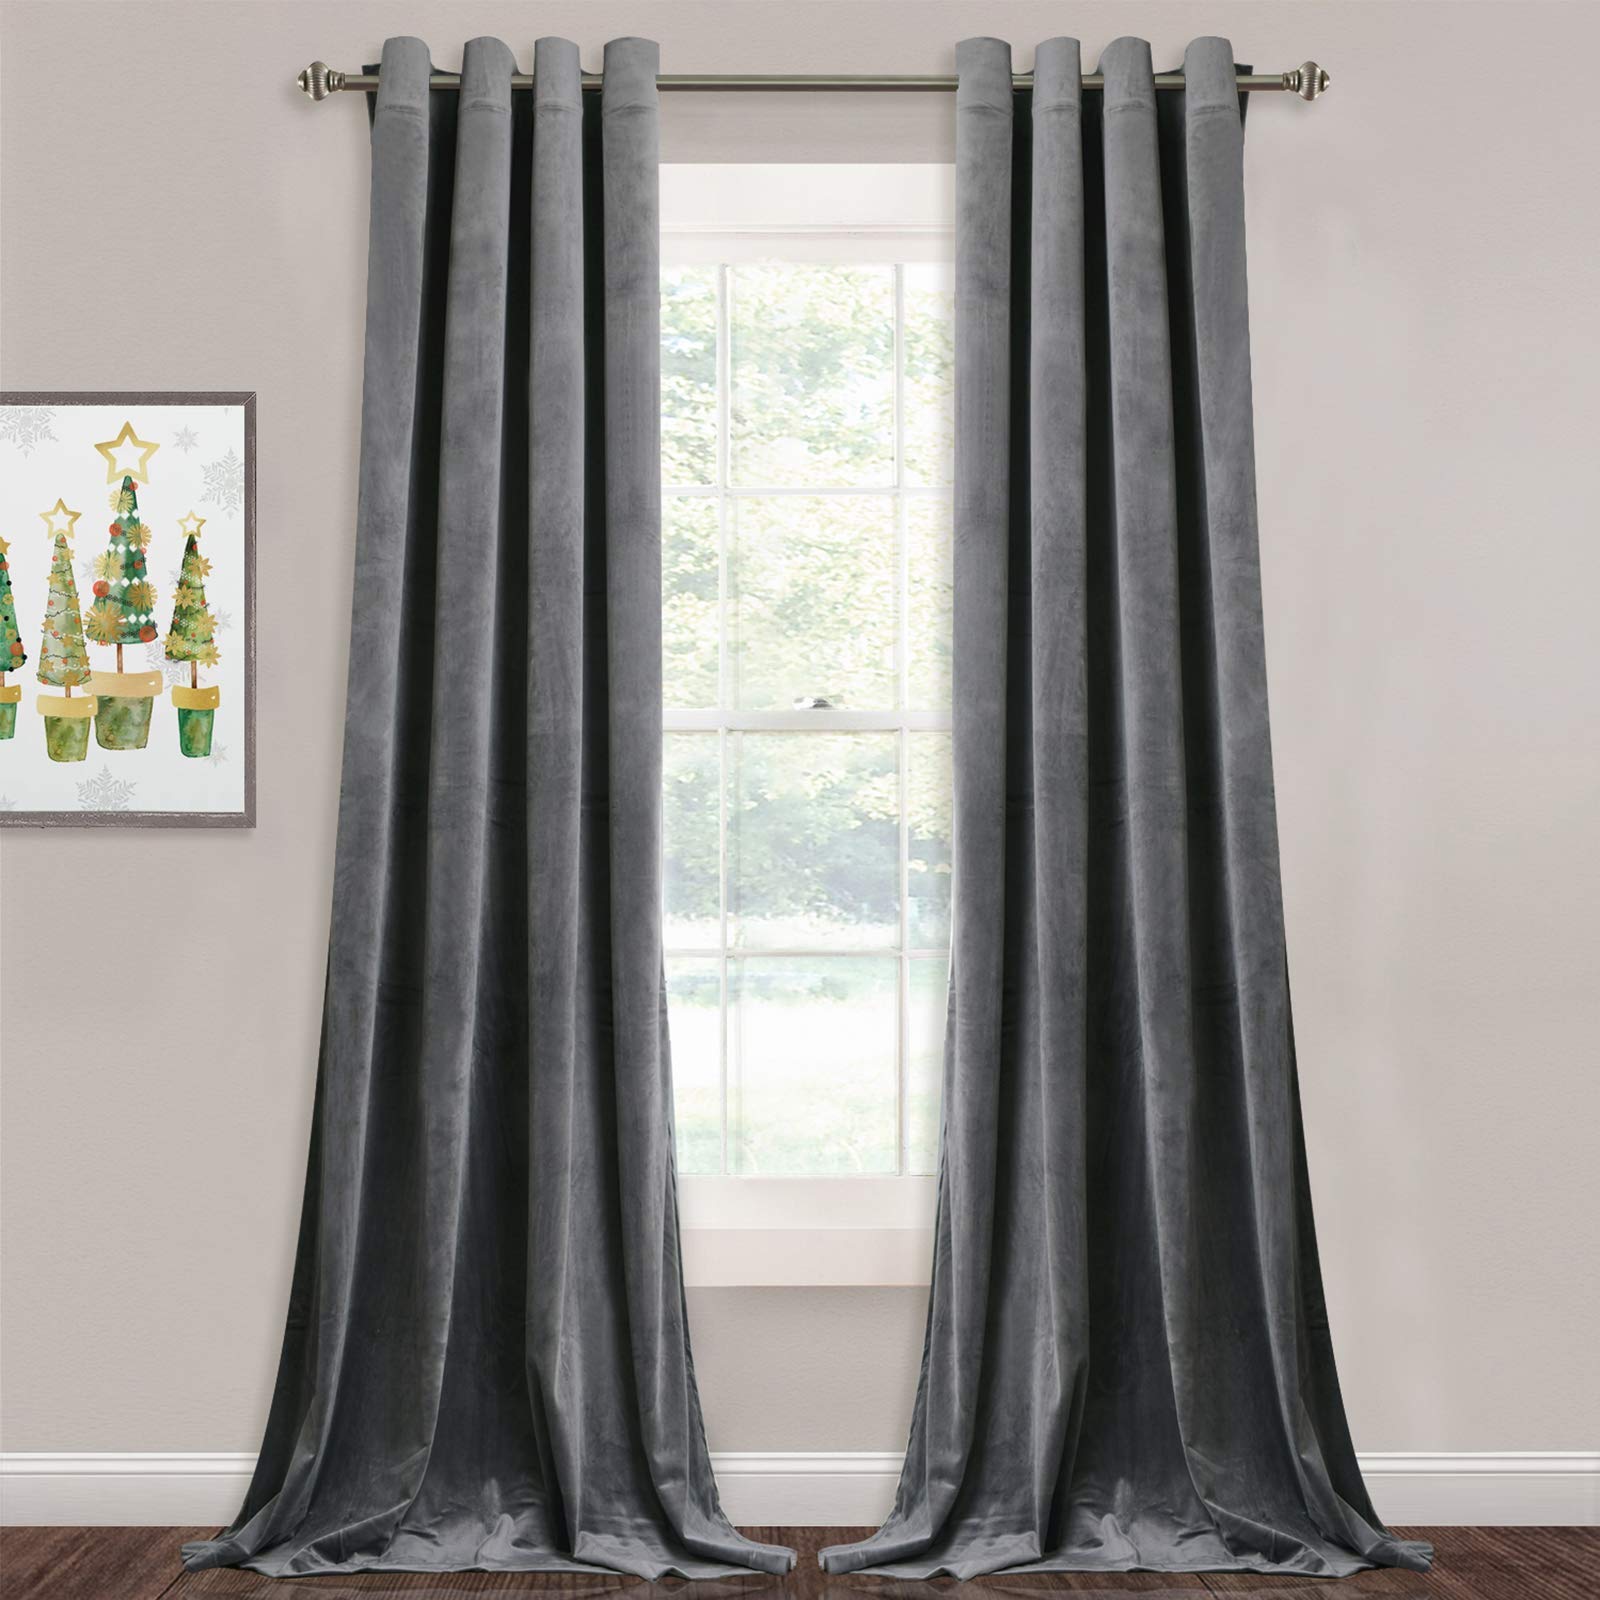 Book Cover StangH Gray Velvet Curtains 84-inch - Elegant Home Decor Room Darkening Velvet Drapes Heat Insulated Window Shade Panels for Living Room / Office, Grey, W52 by L84 inches, 2 Panels